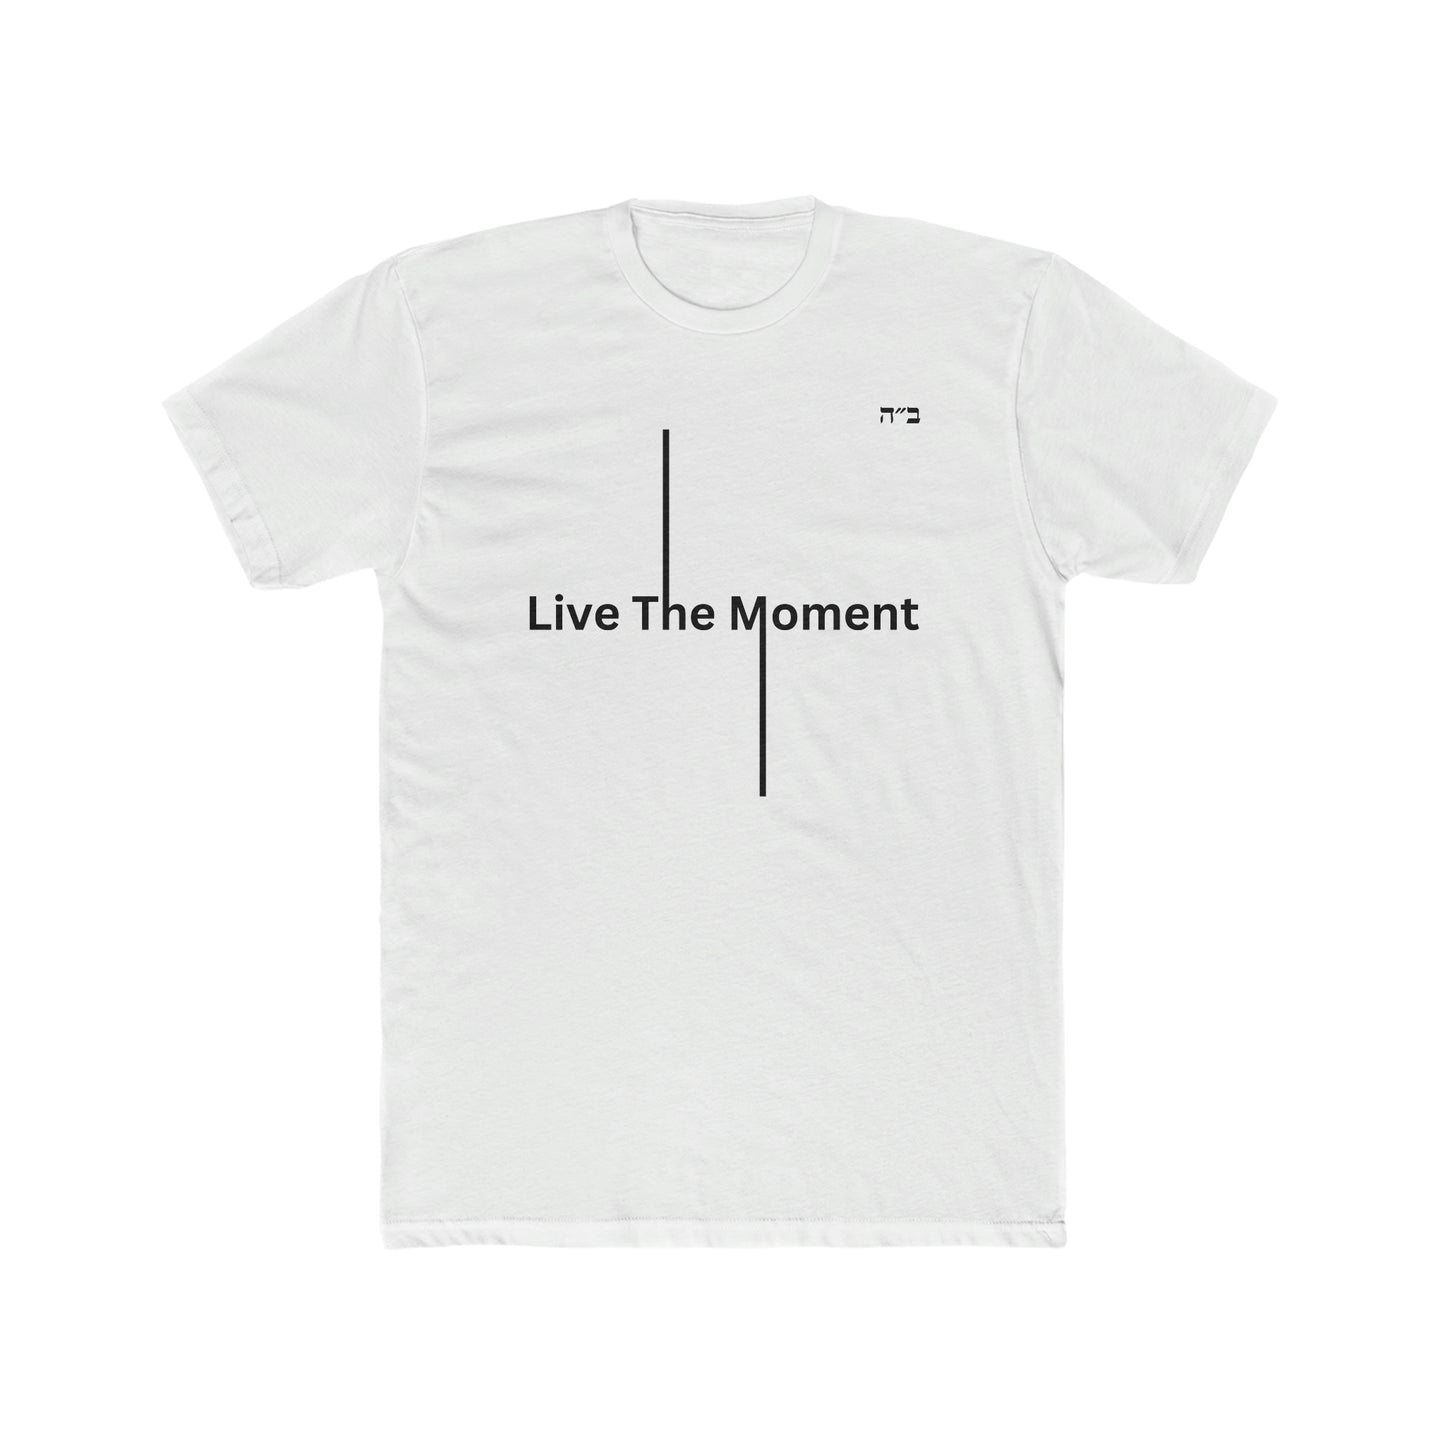 B"H Live The Moment Men's Tee